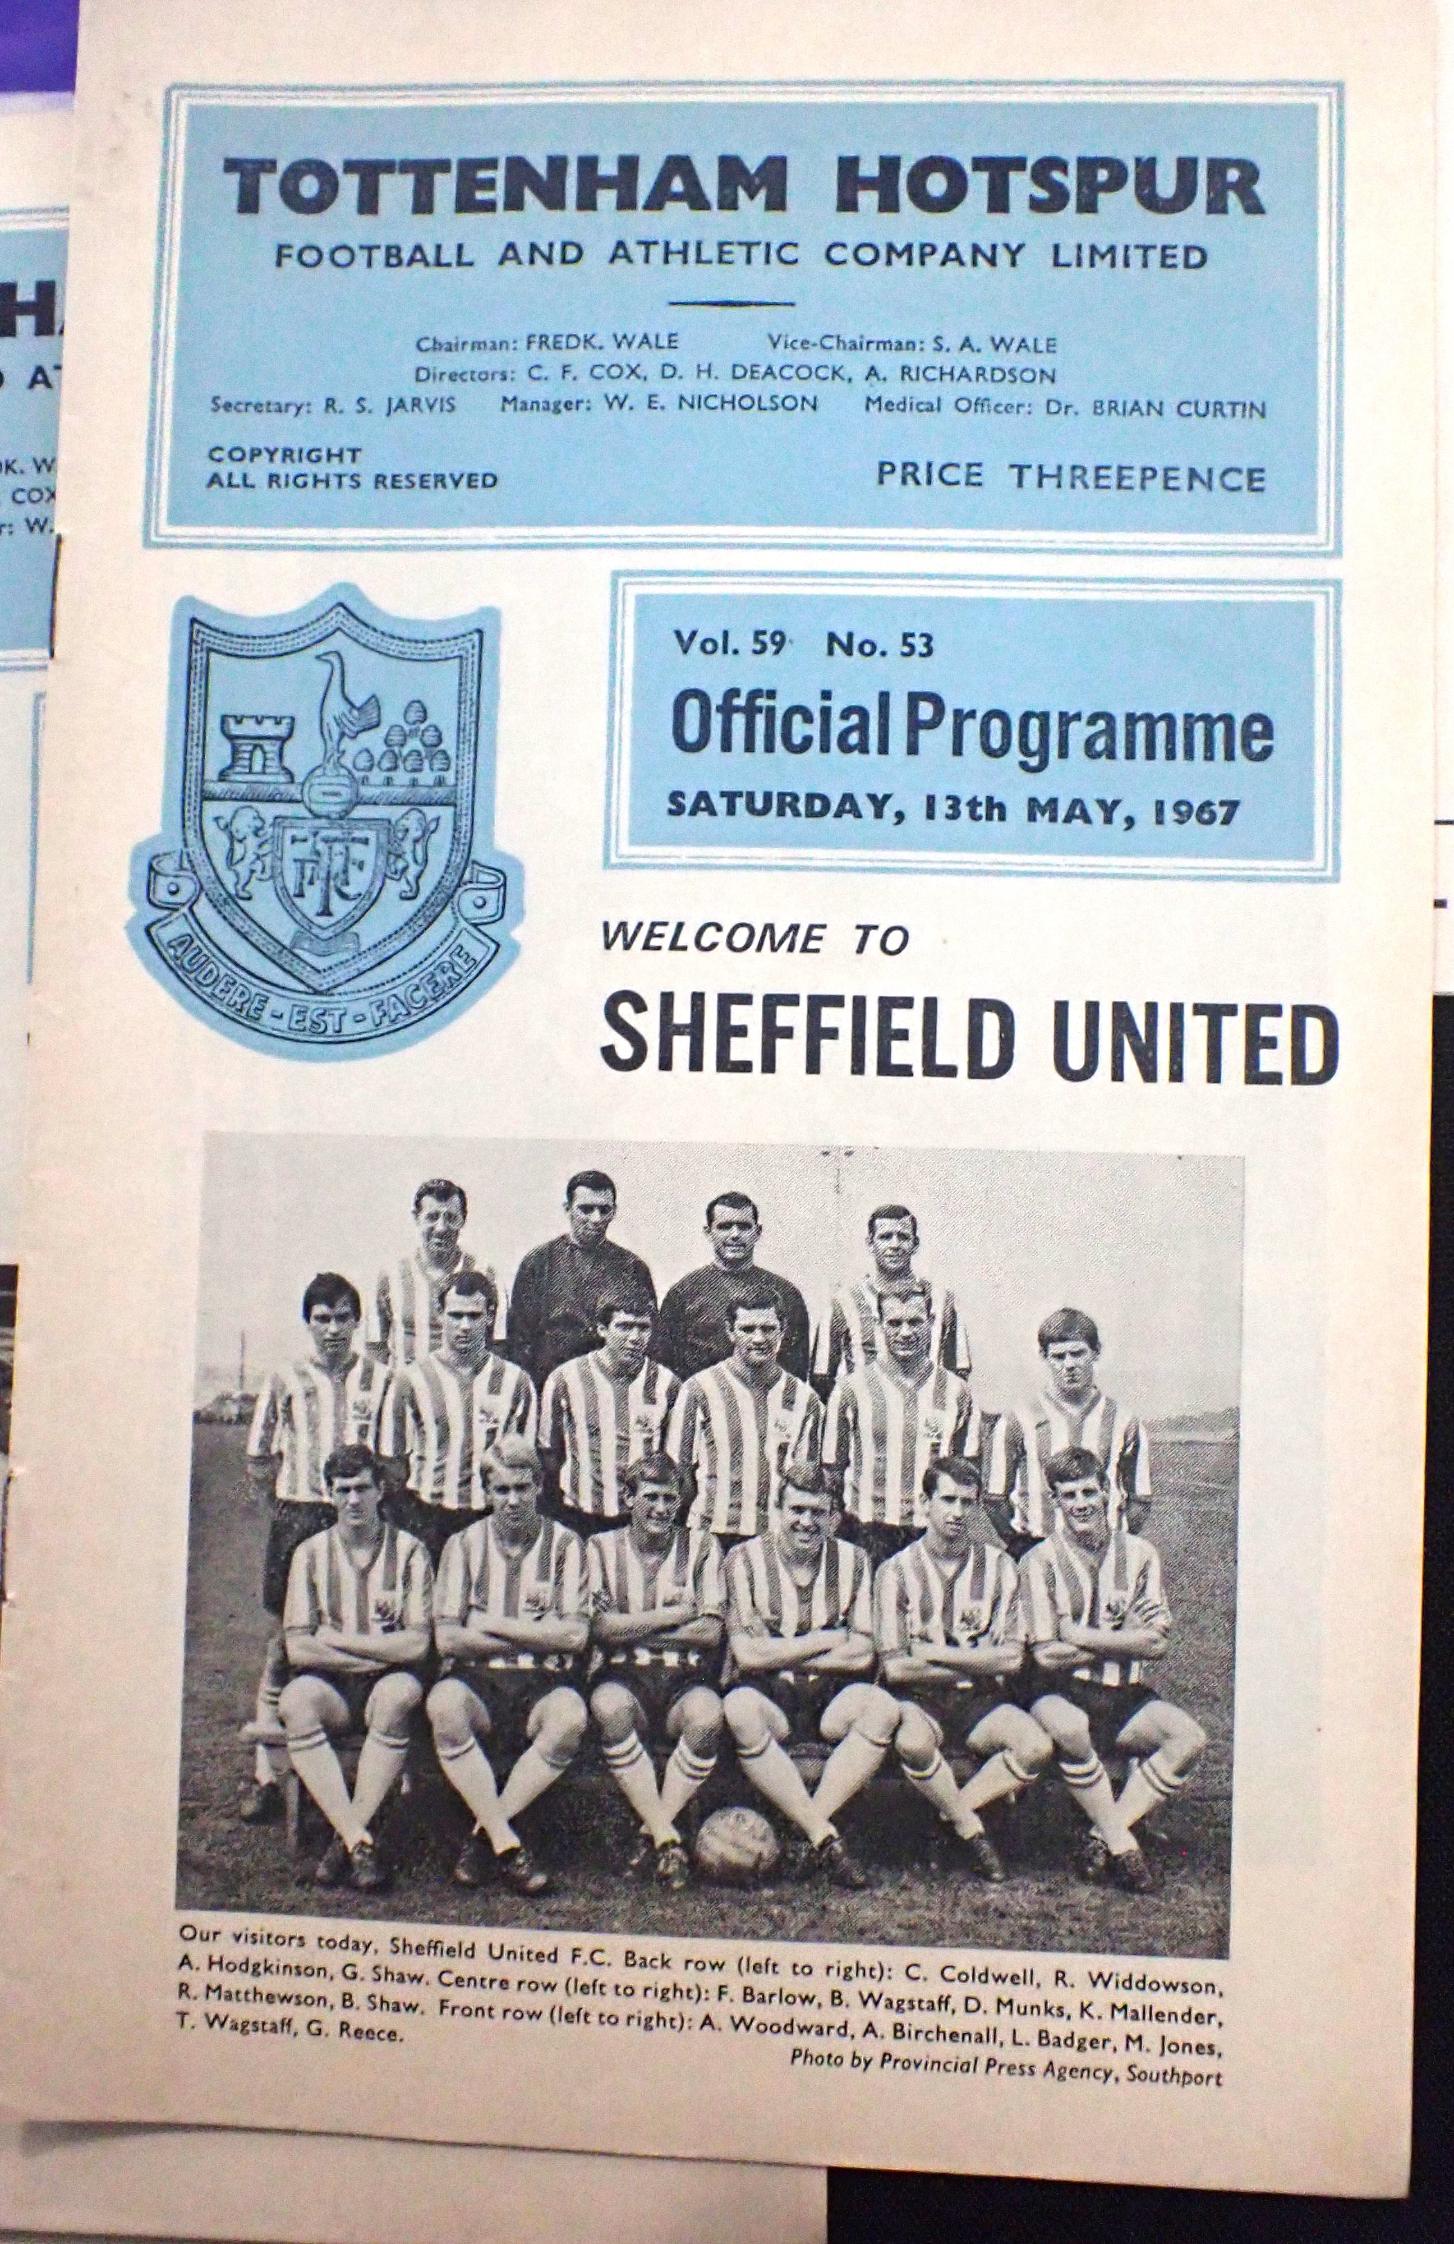 FORTY TWO 1960s LONDON FOOTBALL PROGRAMMES - Image 2 of 4